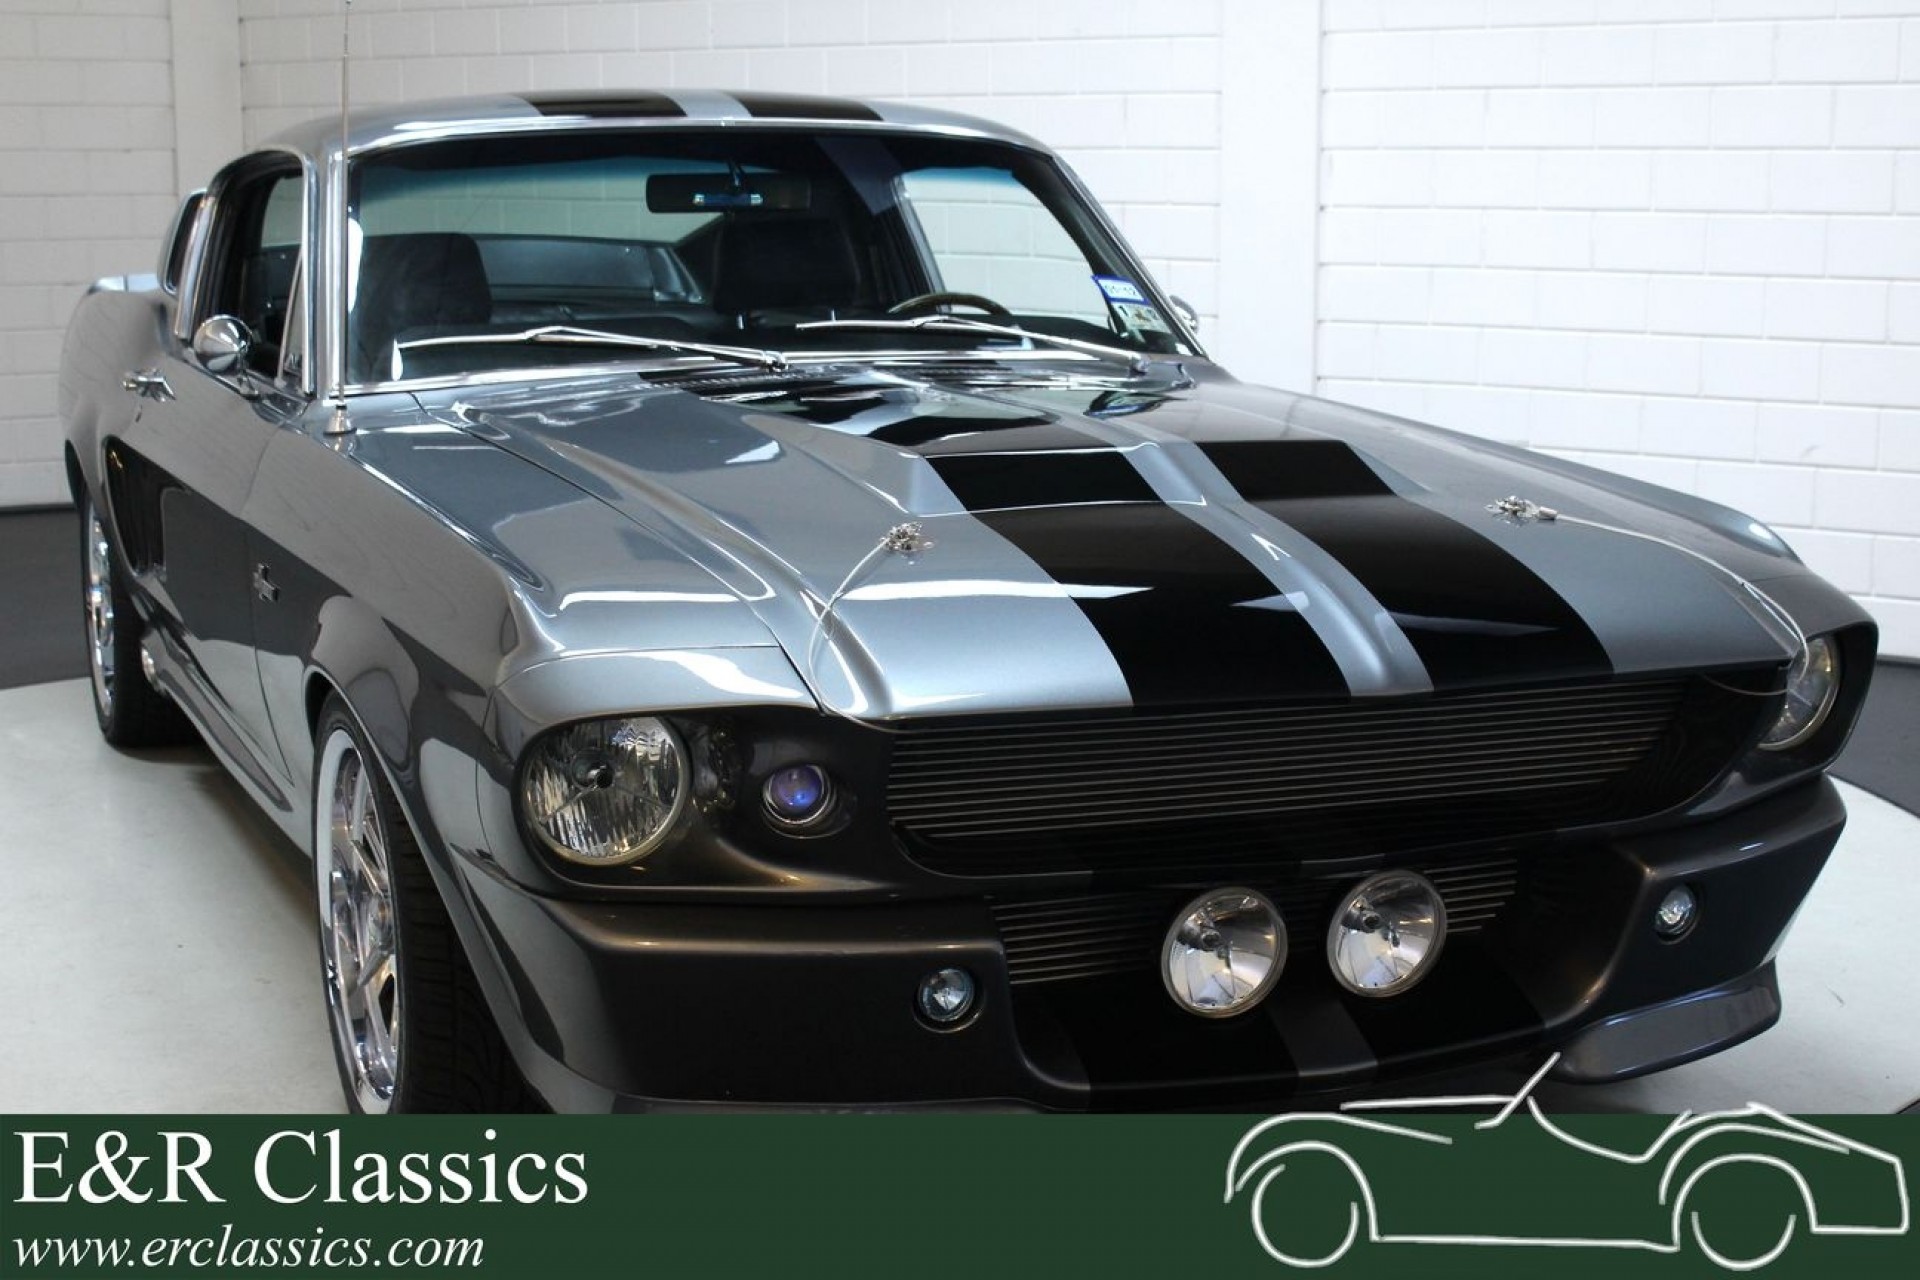 Ford Mustang Fastback Gt500 Shelby Eleanor 1967 For Sale At Erclassics